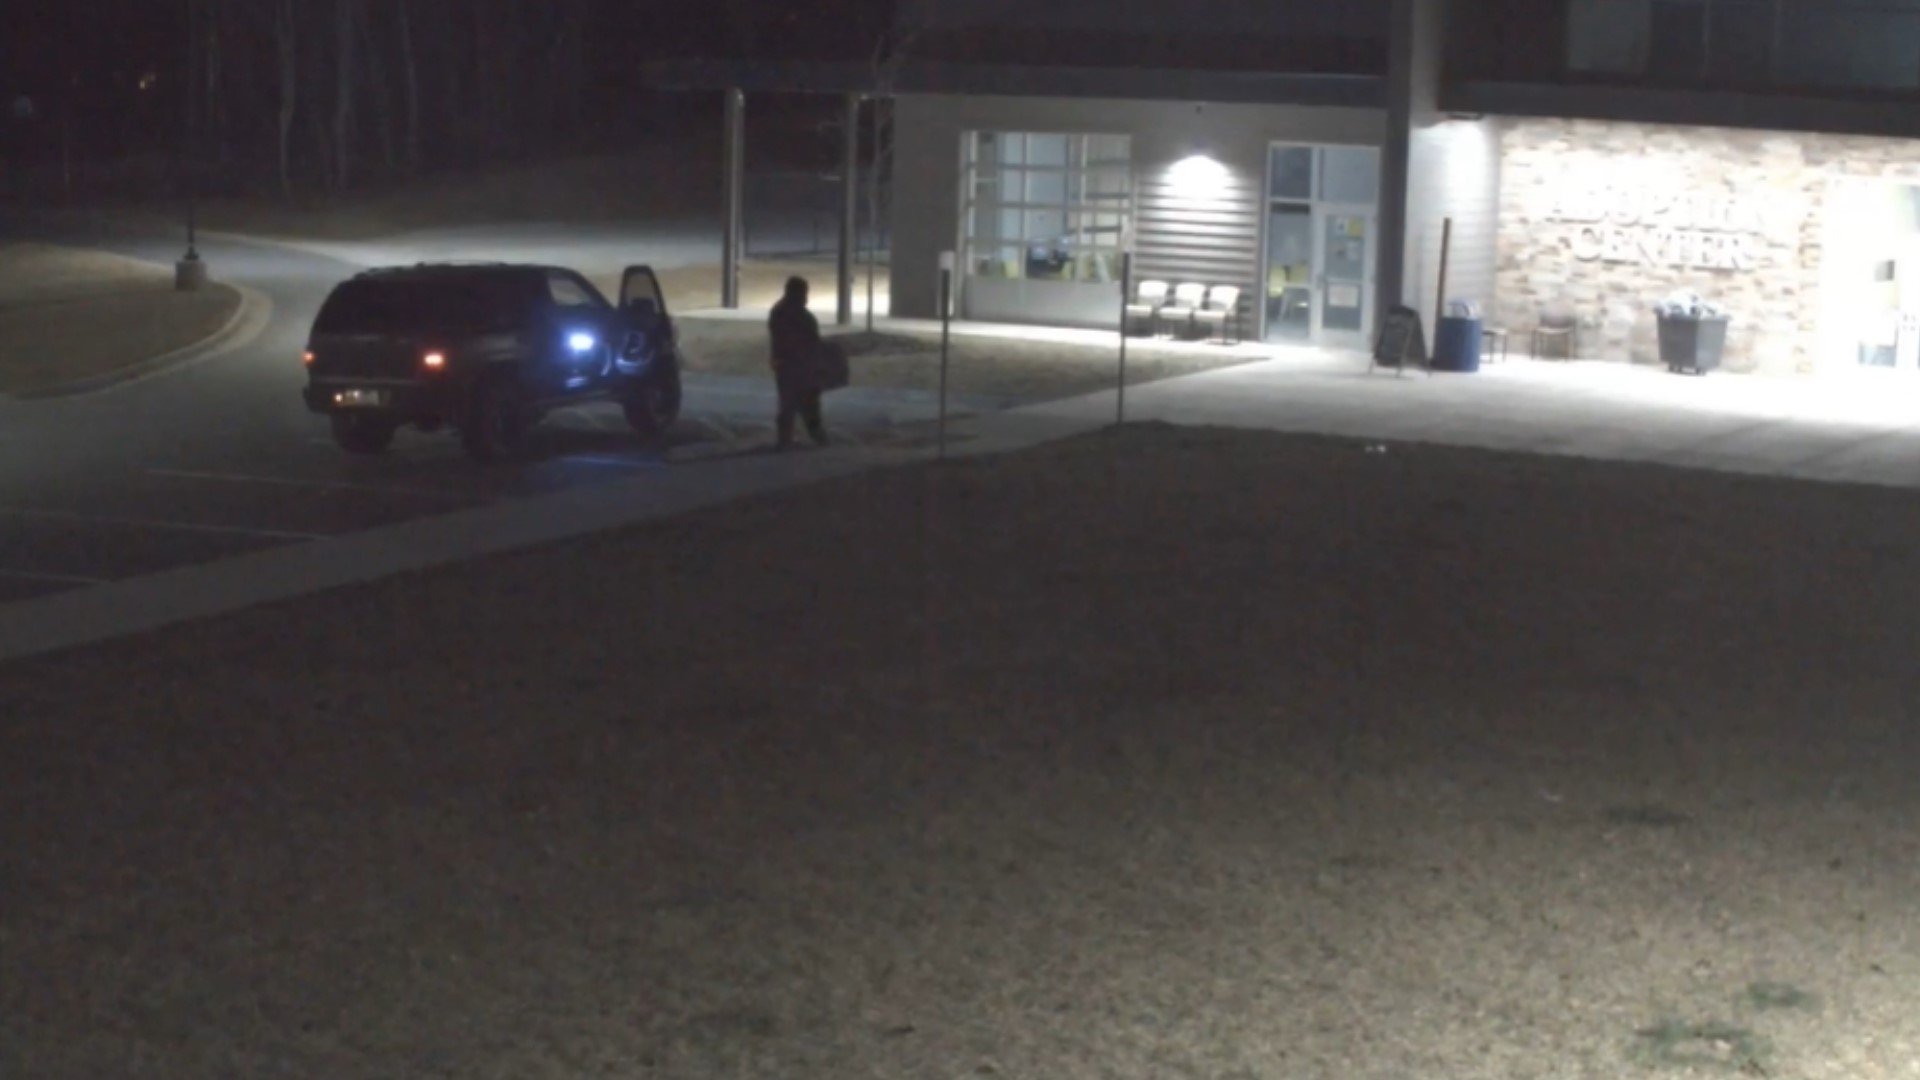 Footage shows someone leaving a dog outside the animal resources center in the cold. The staff found the dog dead the next morning.